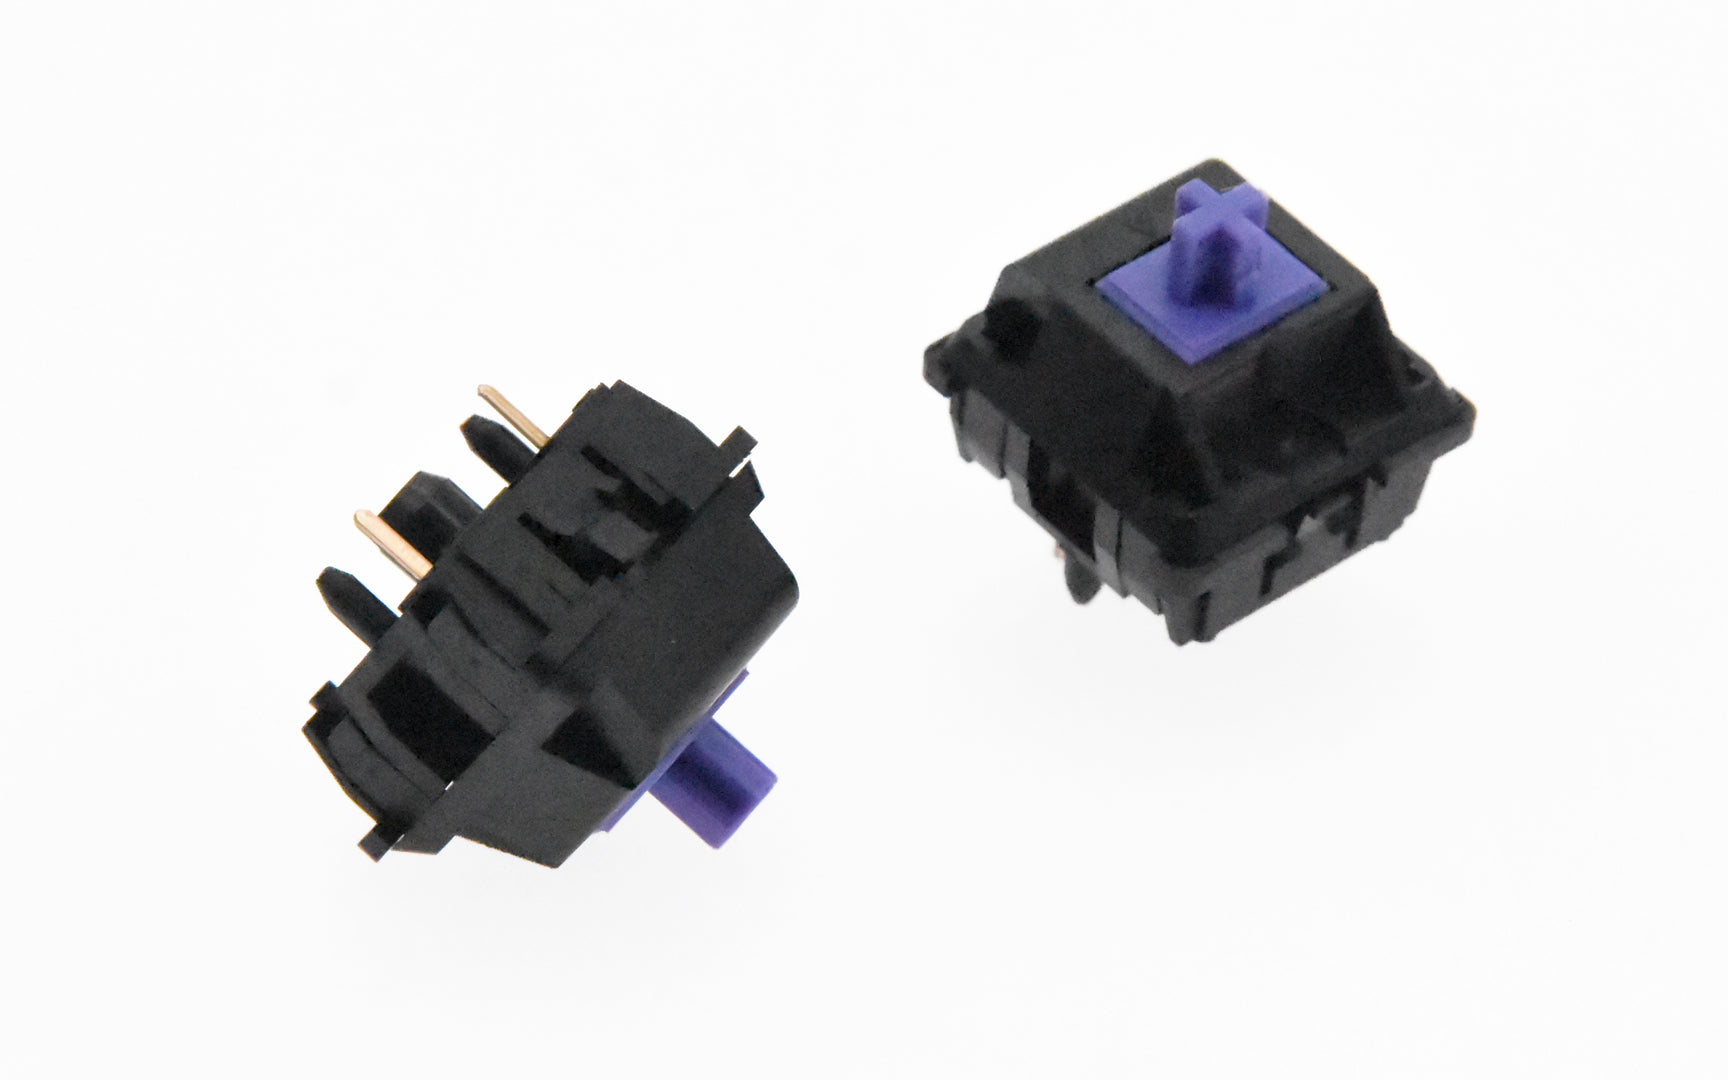 VERTEX V1 LINEAR SWITCH (HAND-LUBED EDITION AVAILABLE)